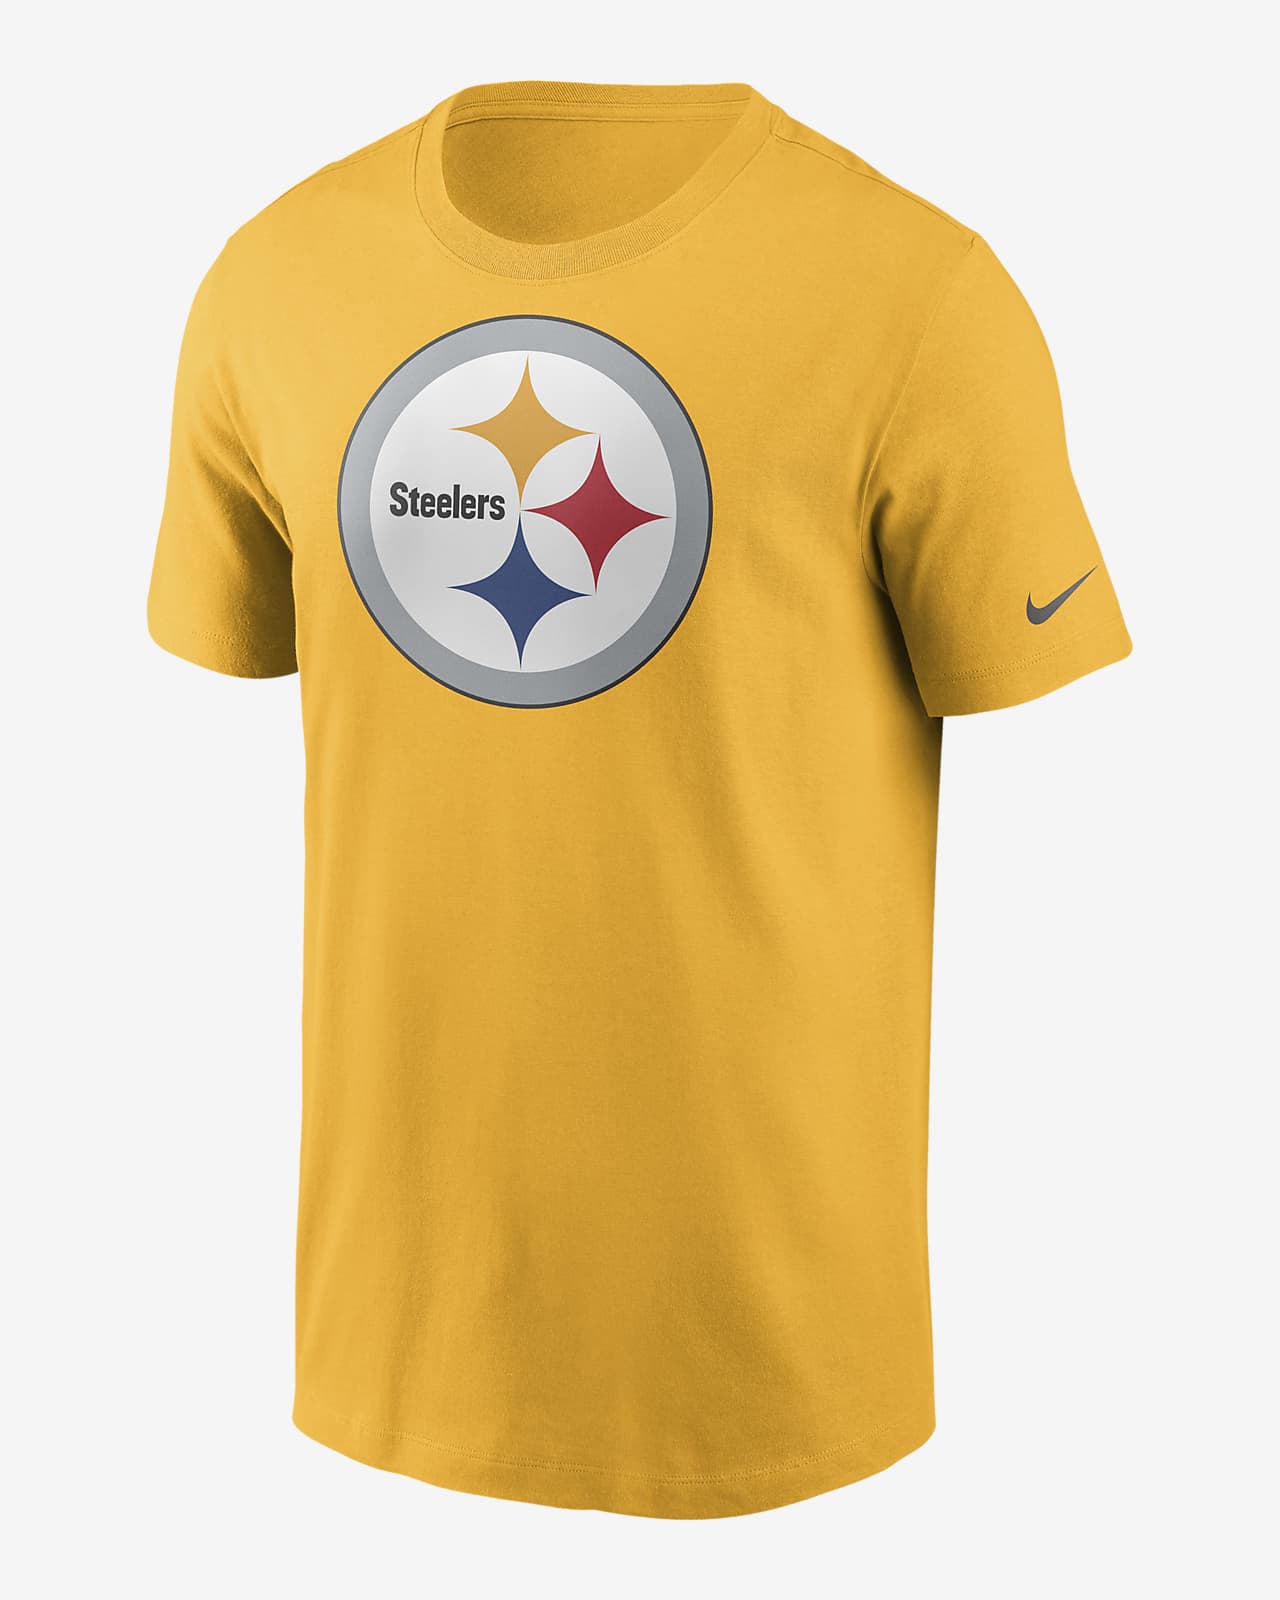 pittsburgh steelers t shirts cheap